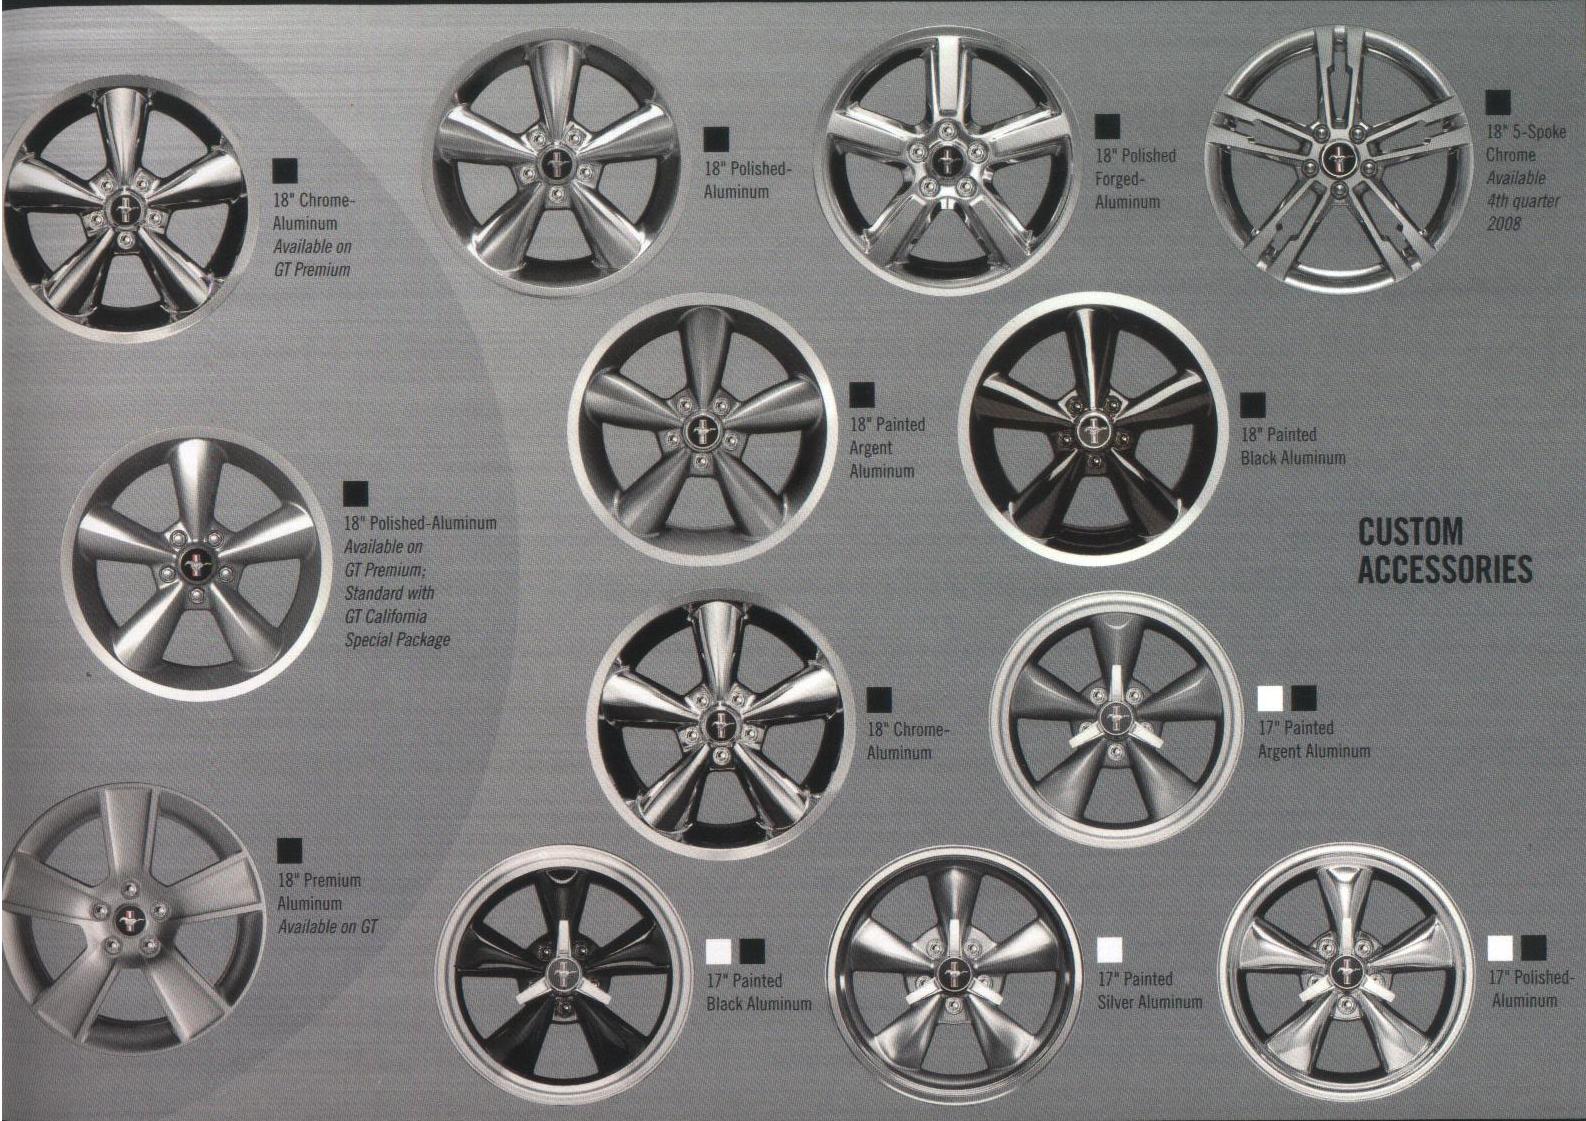 2009 Ford Mustang Factory Wheels! - The Mustang Source ...